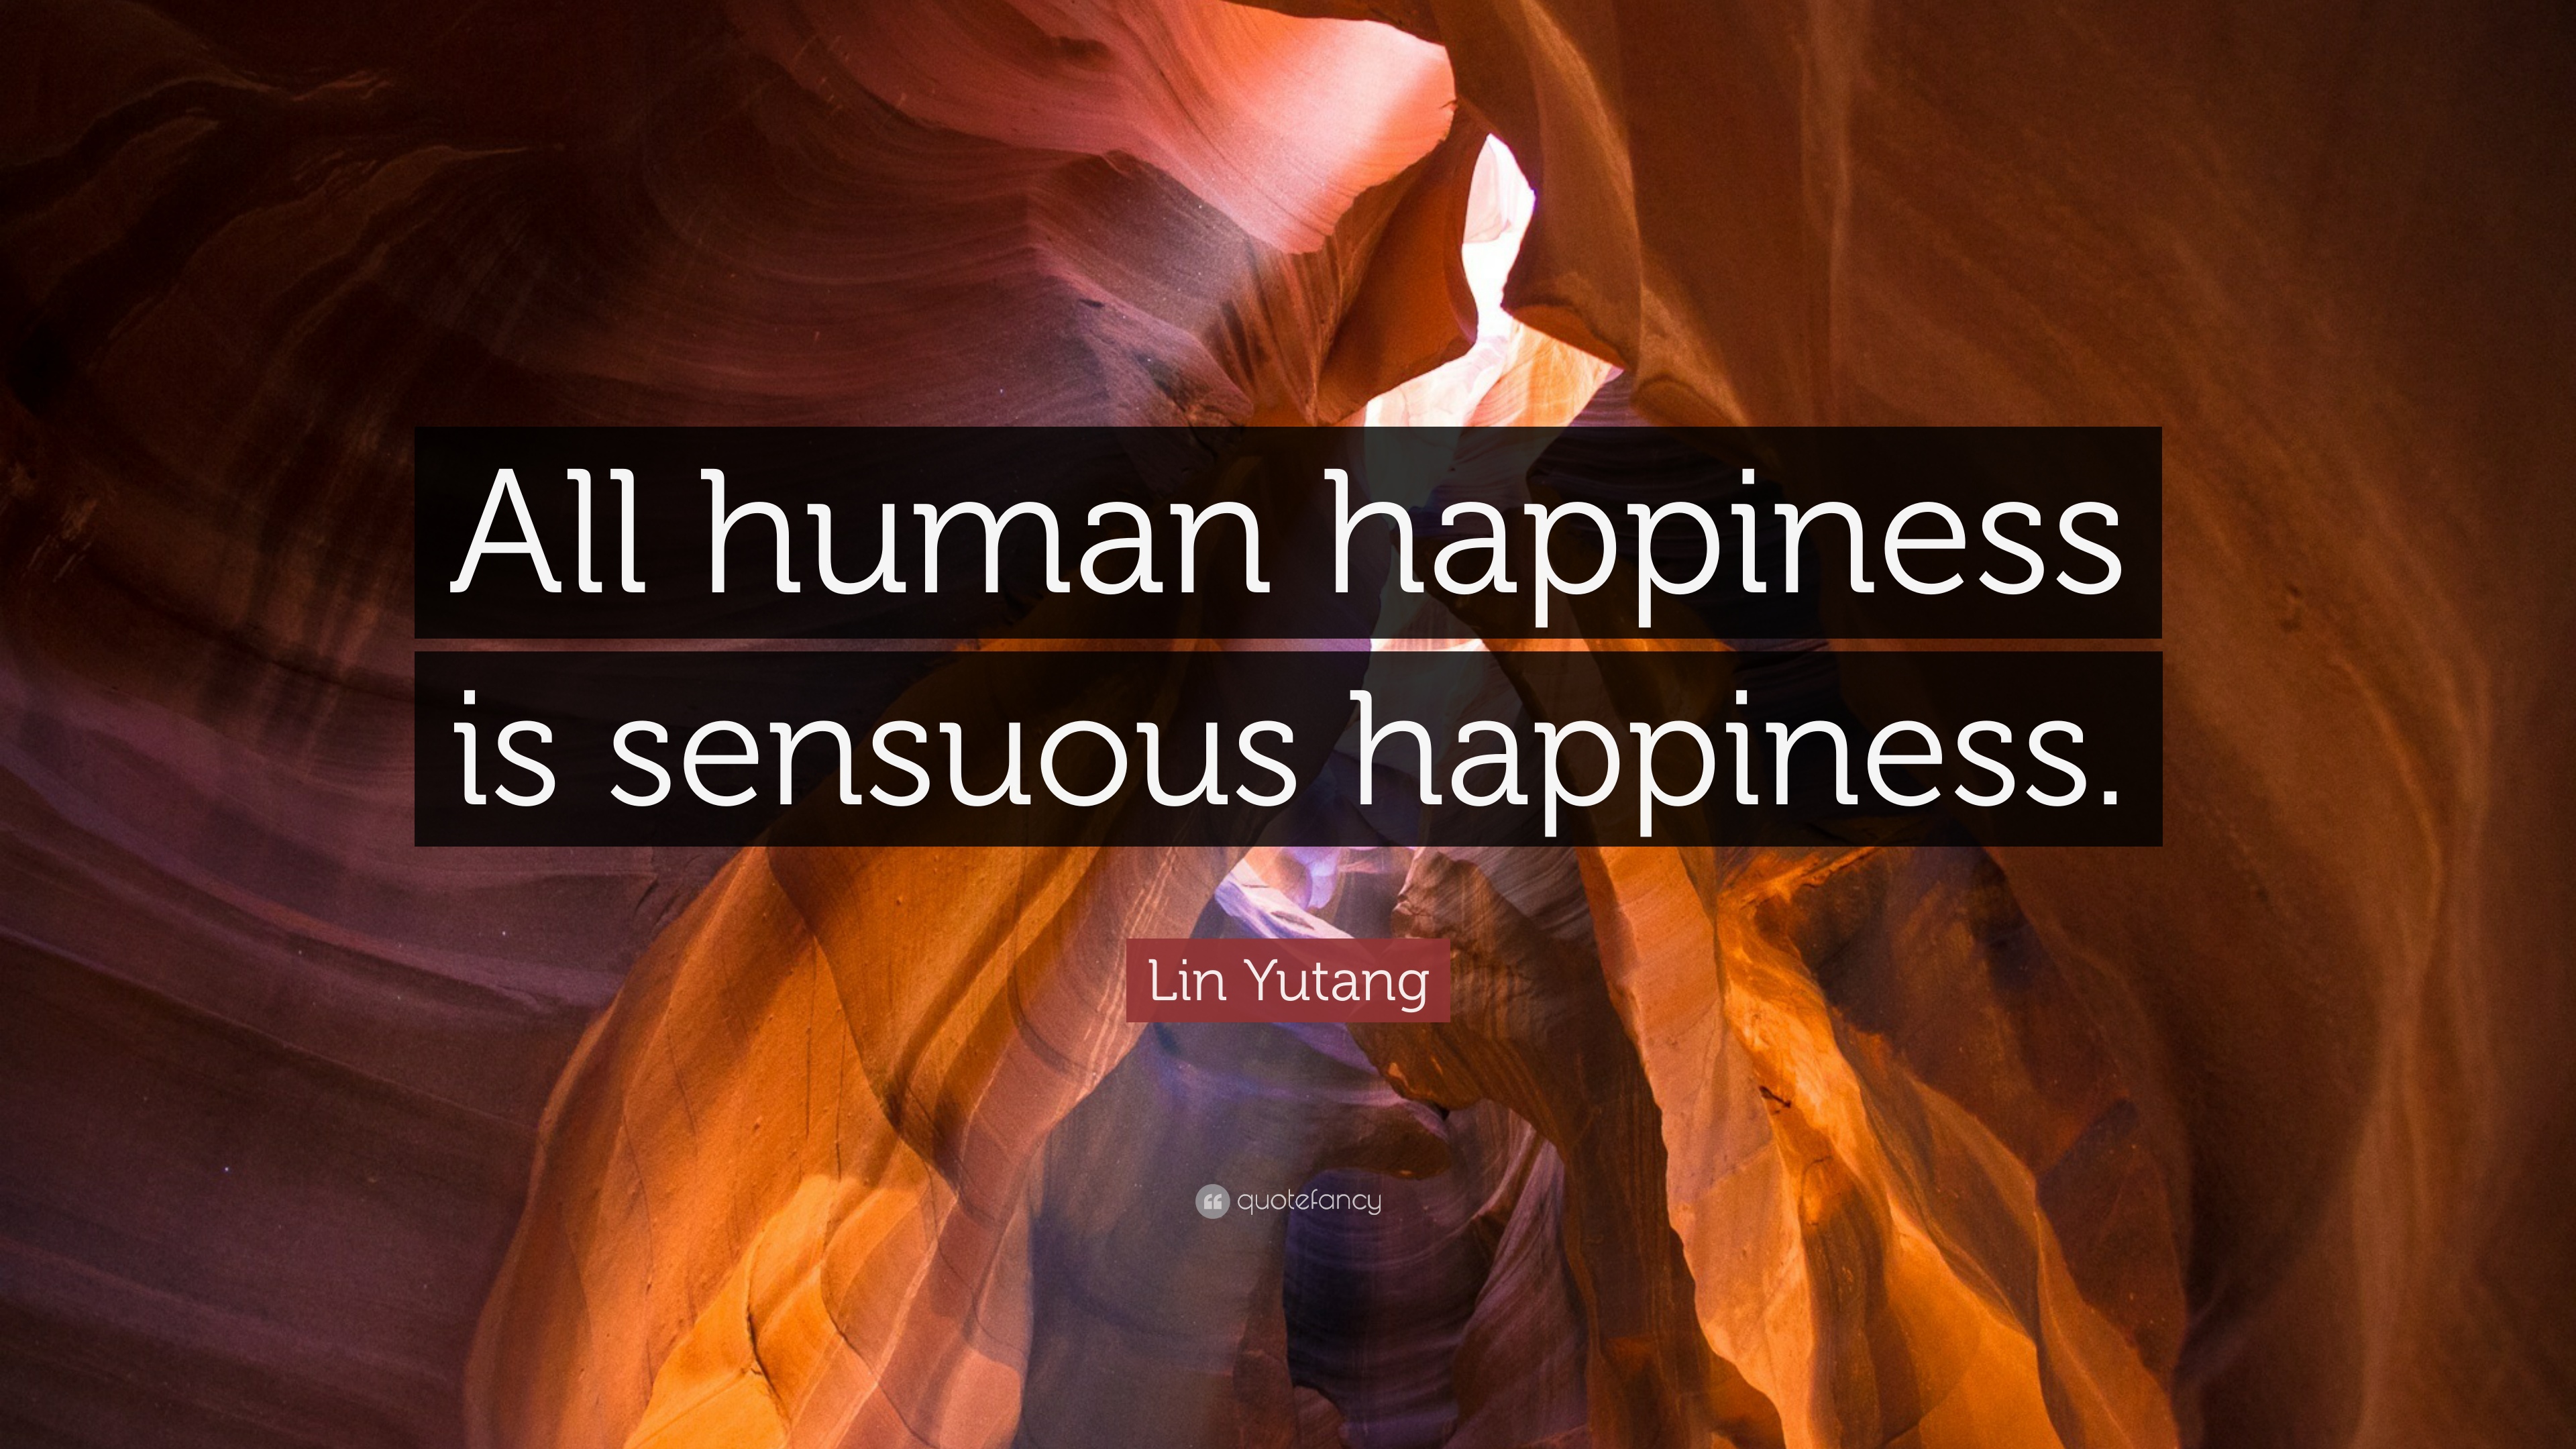 Lin Yutang Quote: “All human happiness is sensuous happiness